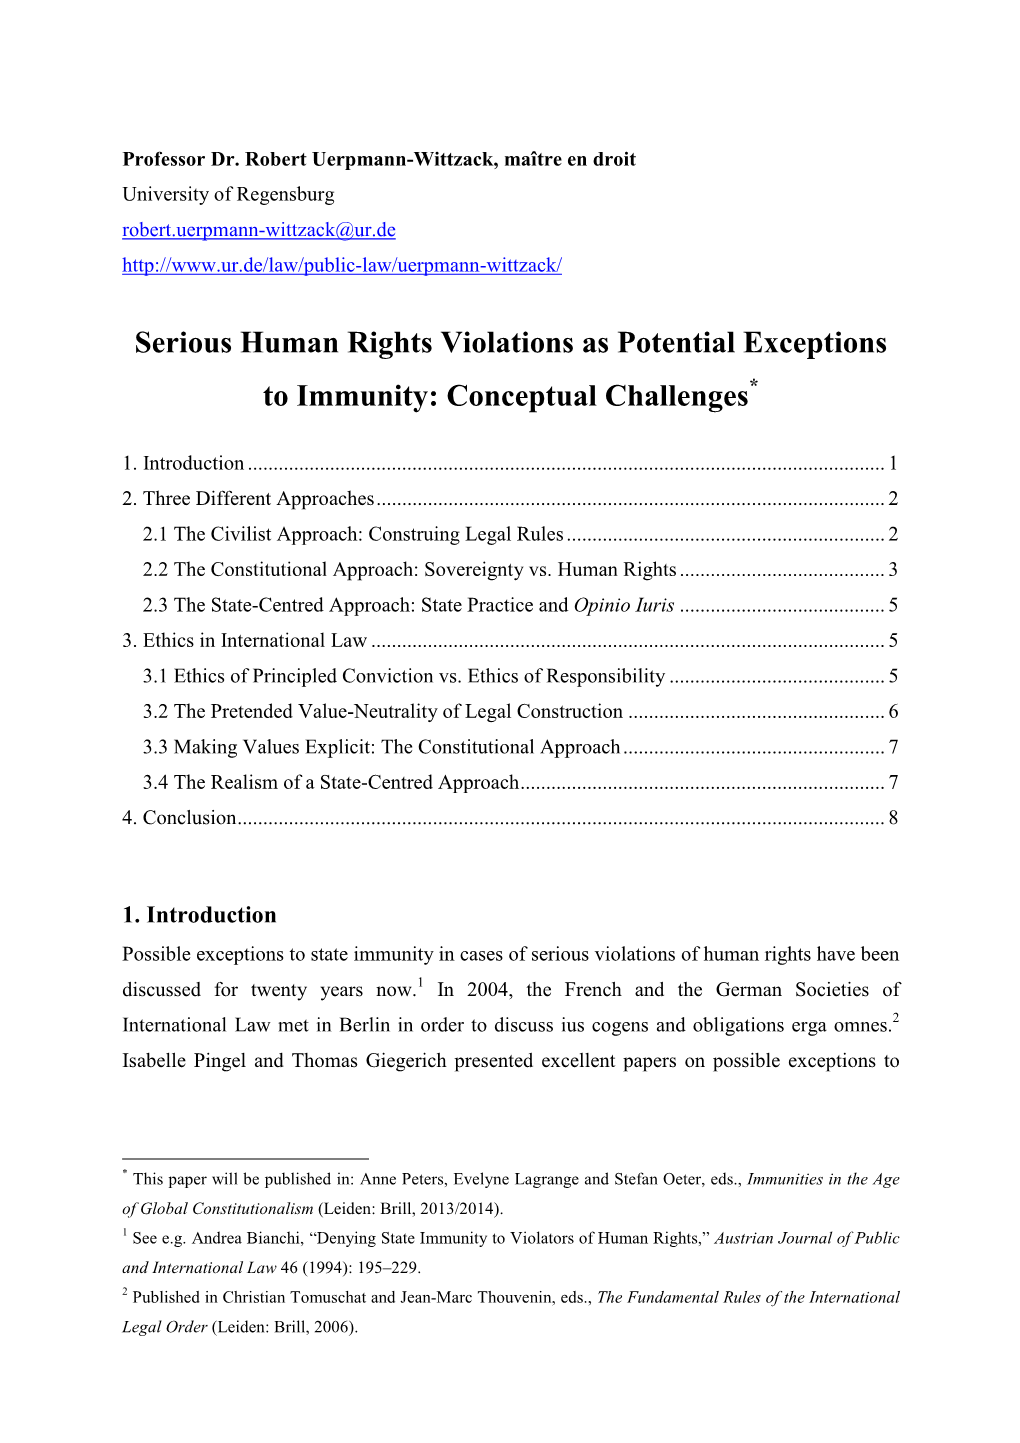 Serious Human Rights Violations As Potential Exceptions to Immunity: Conceptual Challenges *